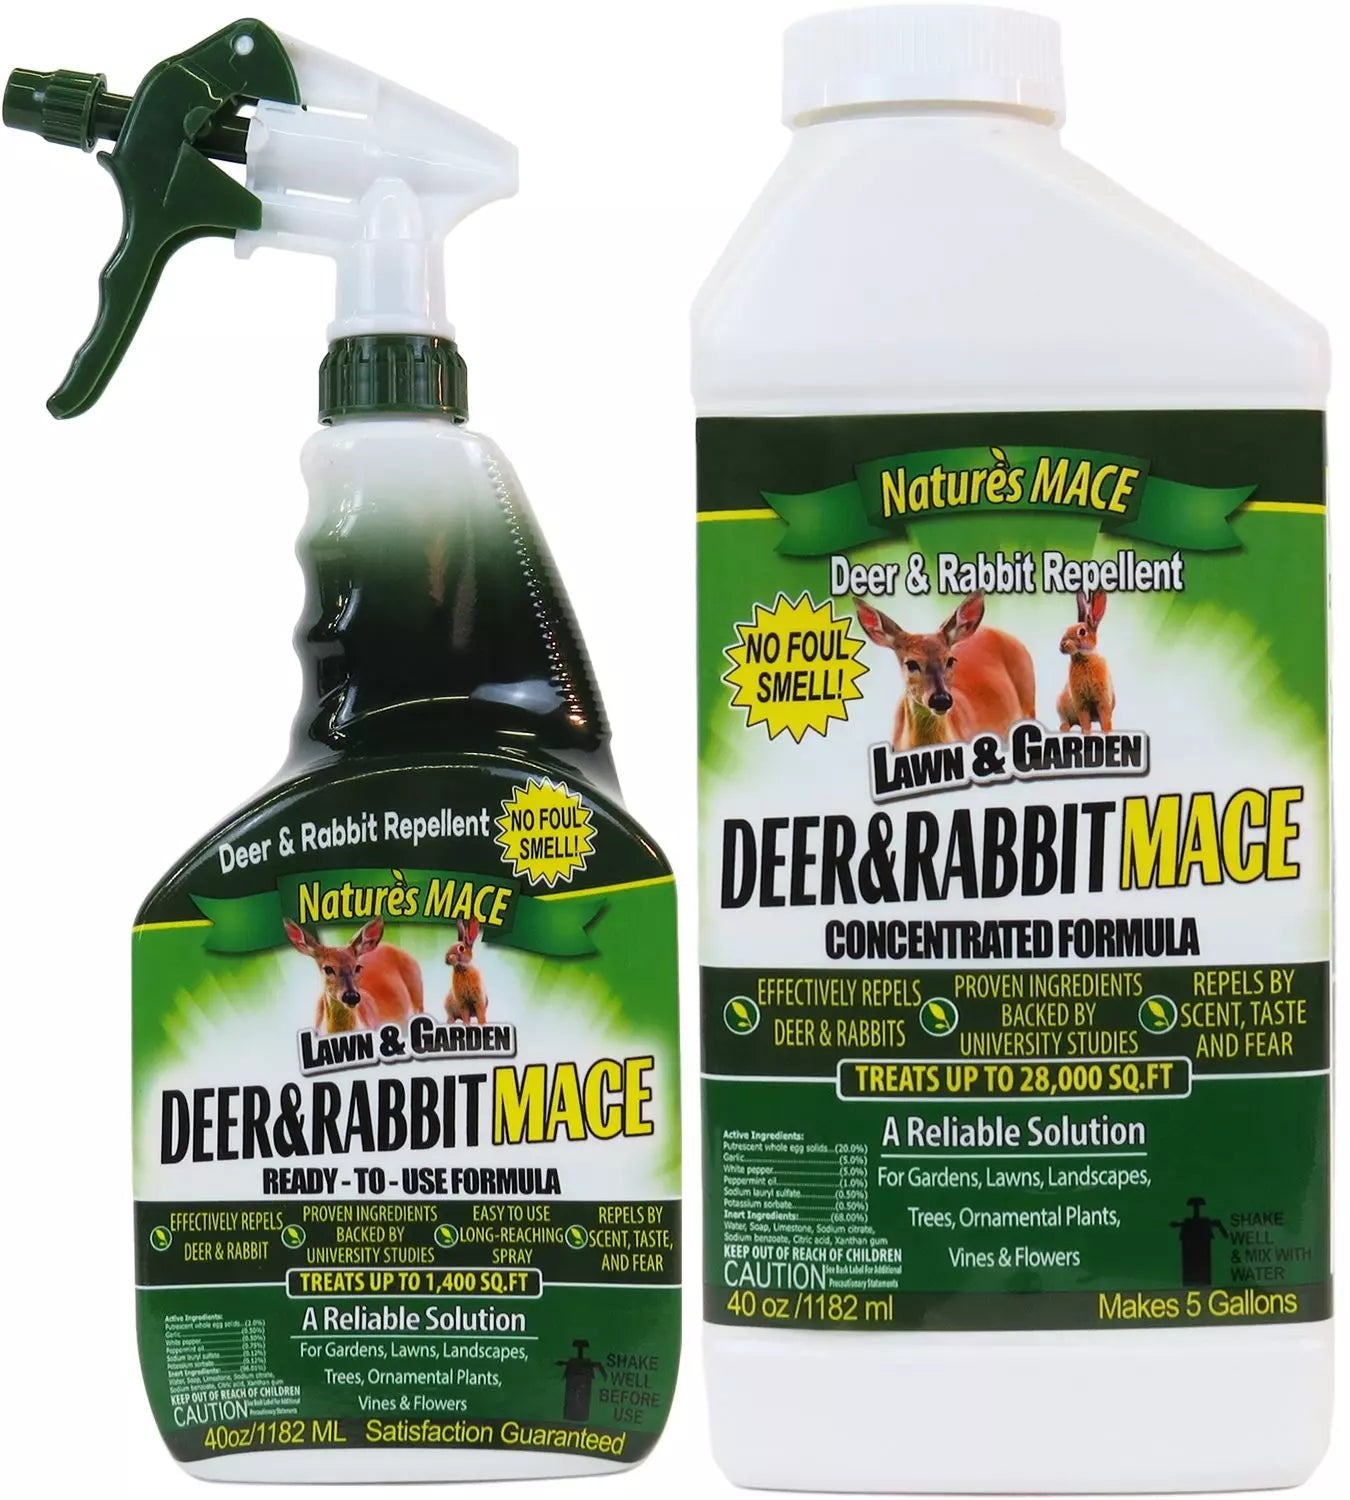 Die Keule der Natur, Nature's Mace Deer & Rabbit Mace Ready-to-Use Spray Concentrate Treats